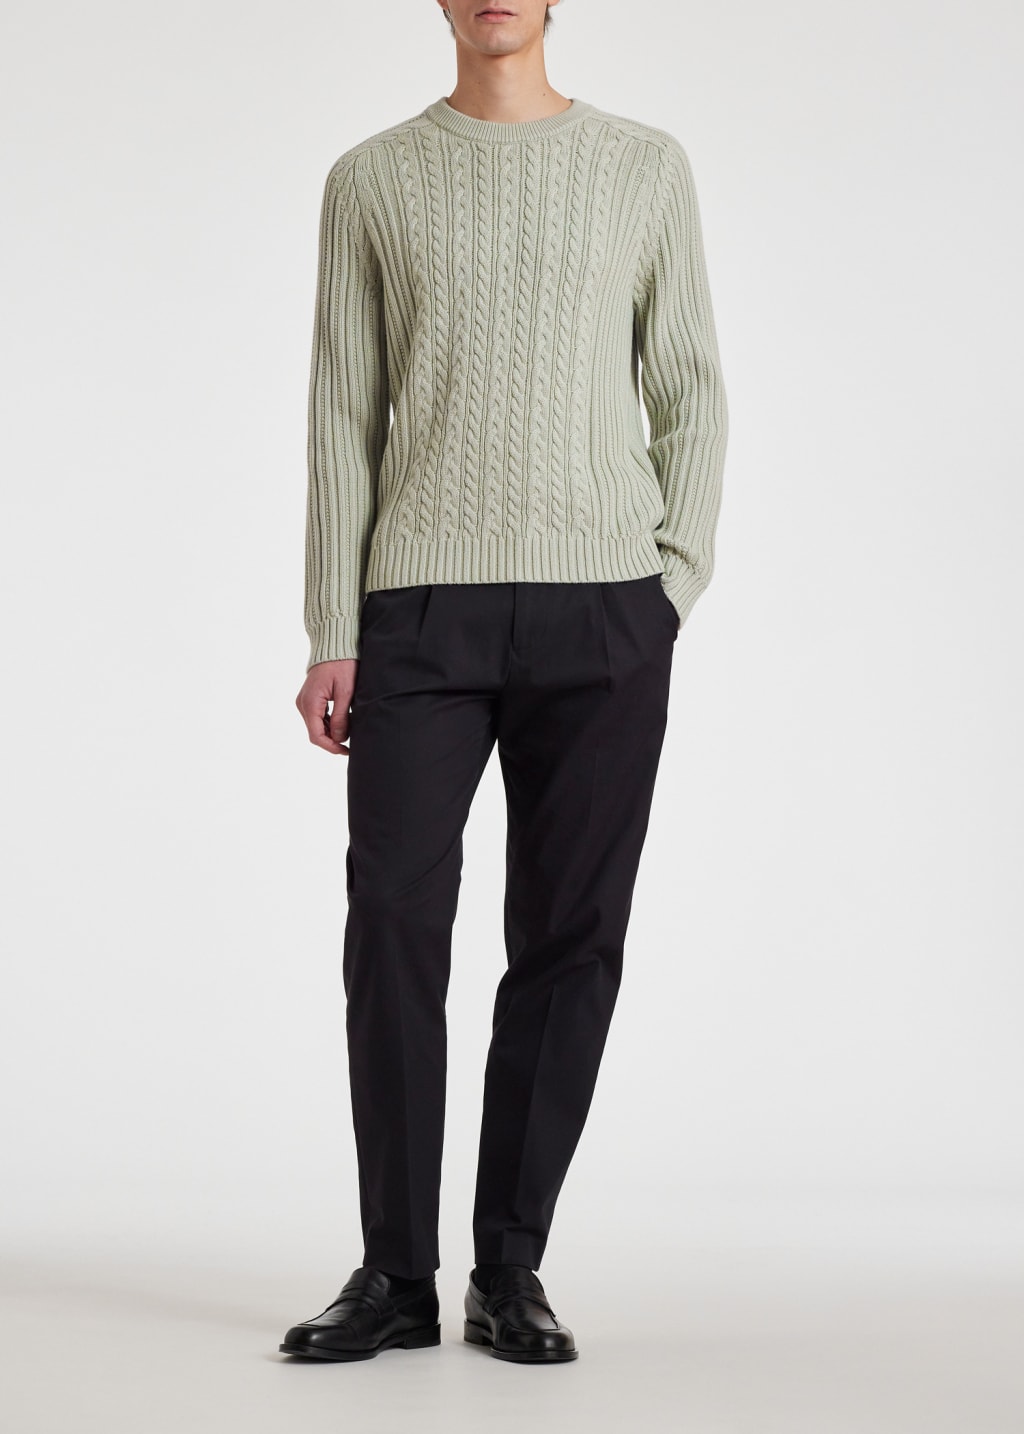 Model View - Pale Green Cotton-Cashmere Cable Knit Sweater Paul Smith